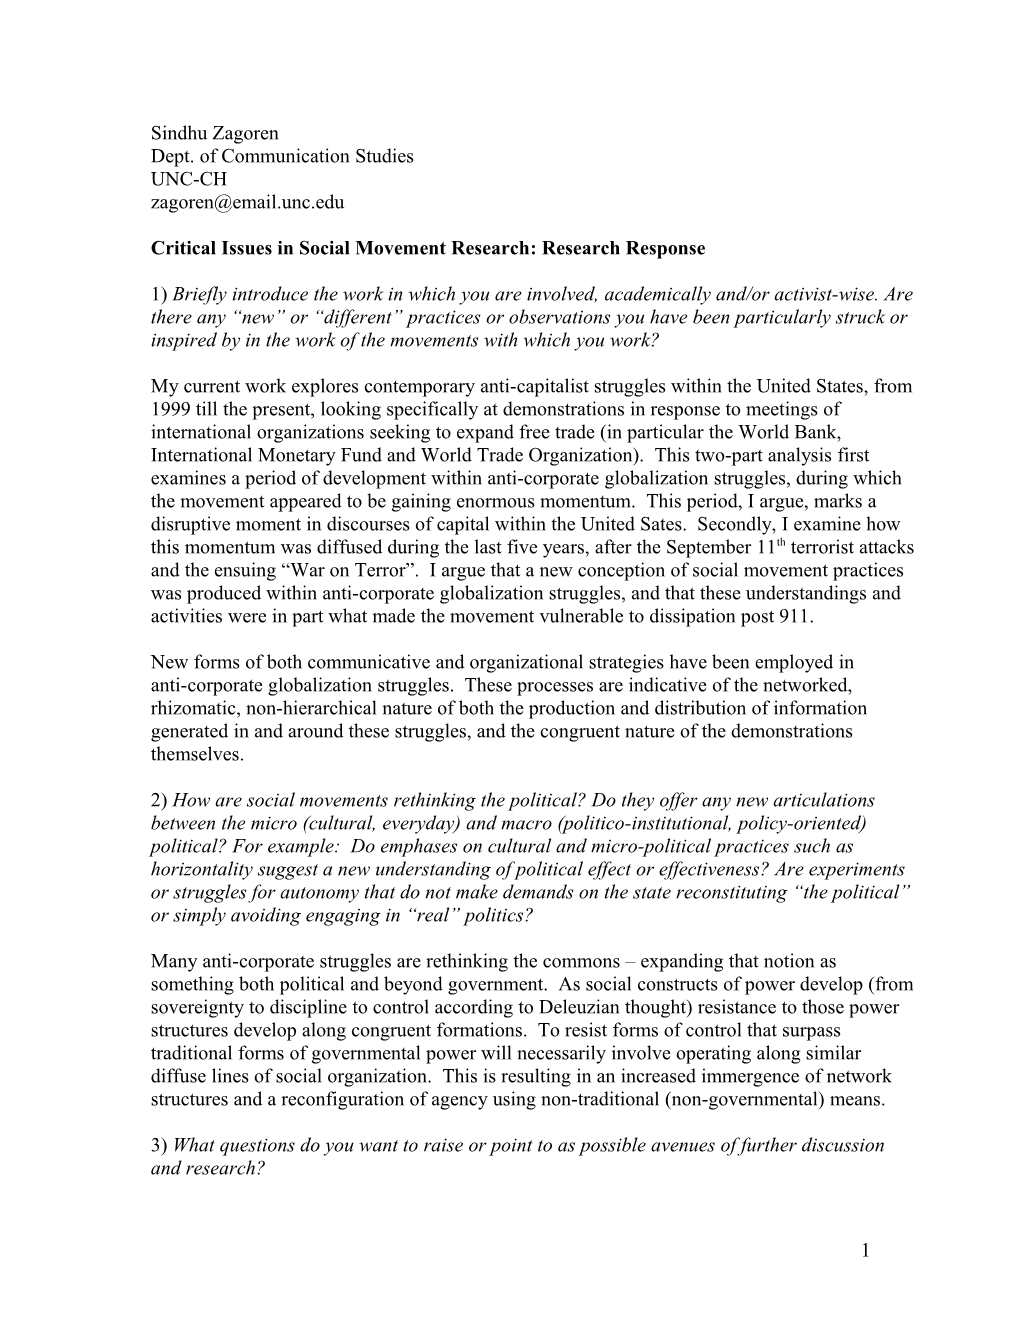 Critical Issues in Social Movement Research: Research Response